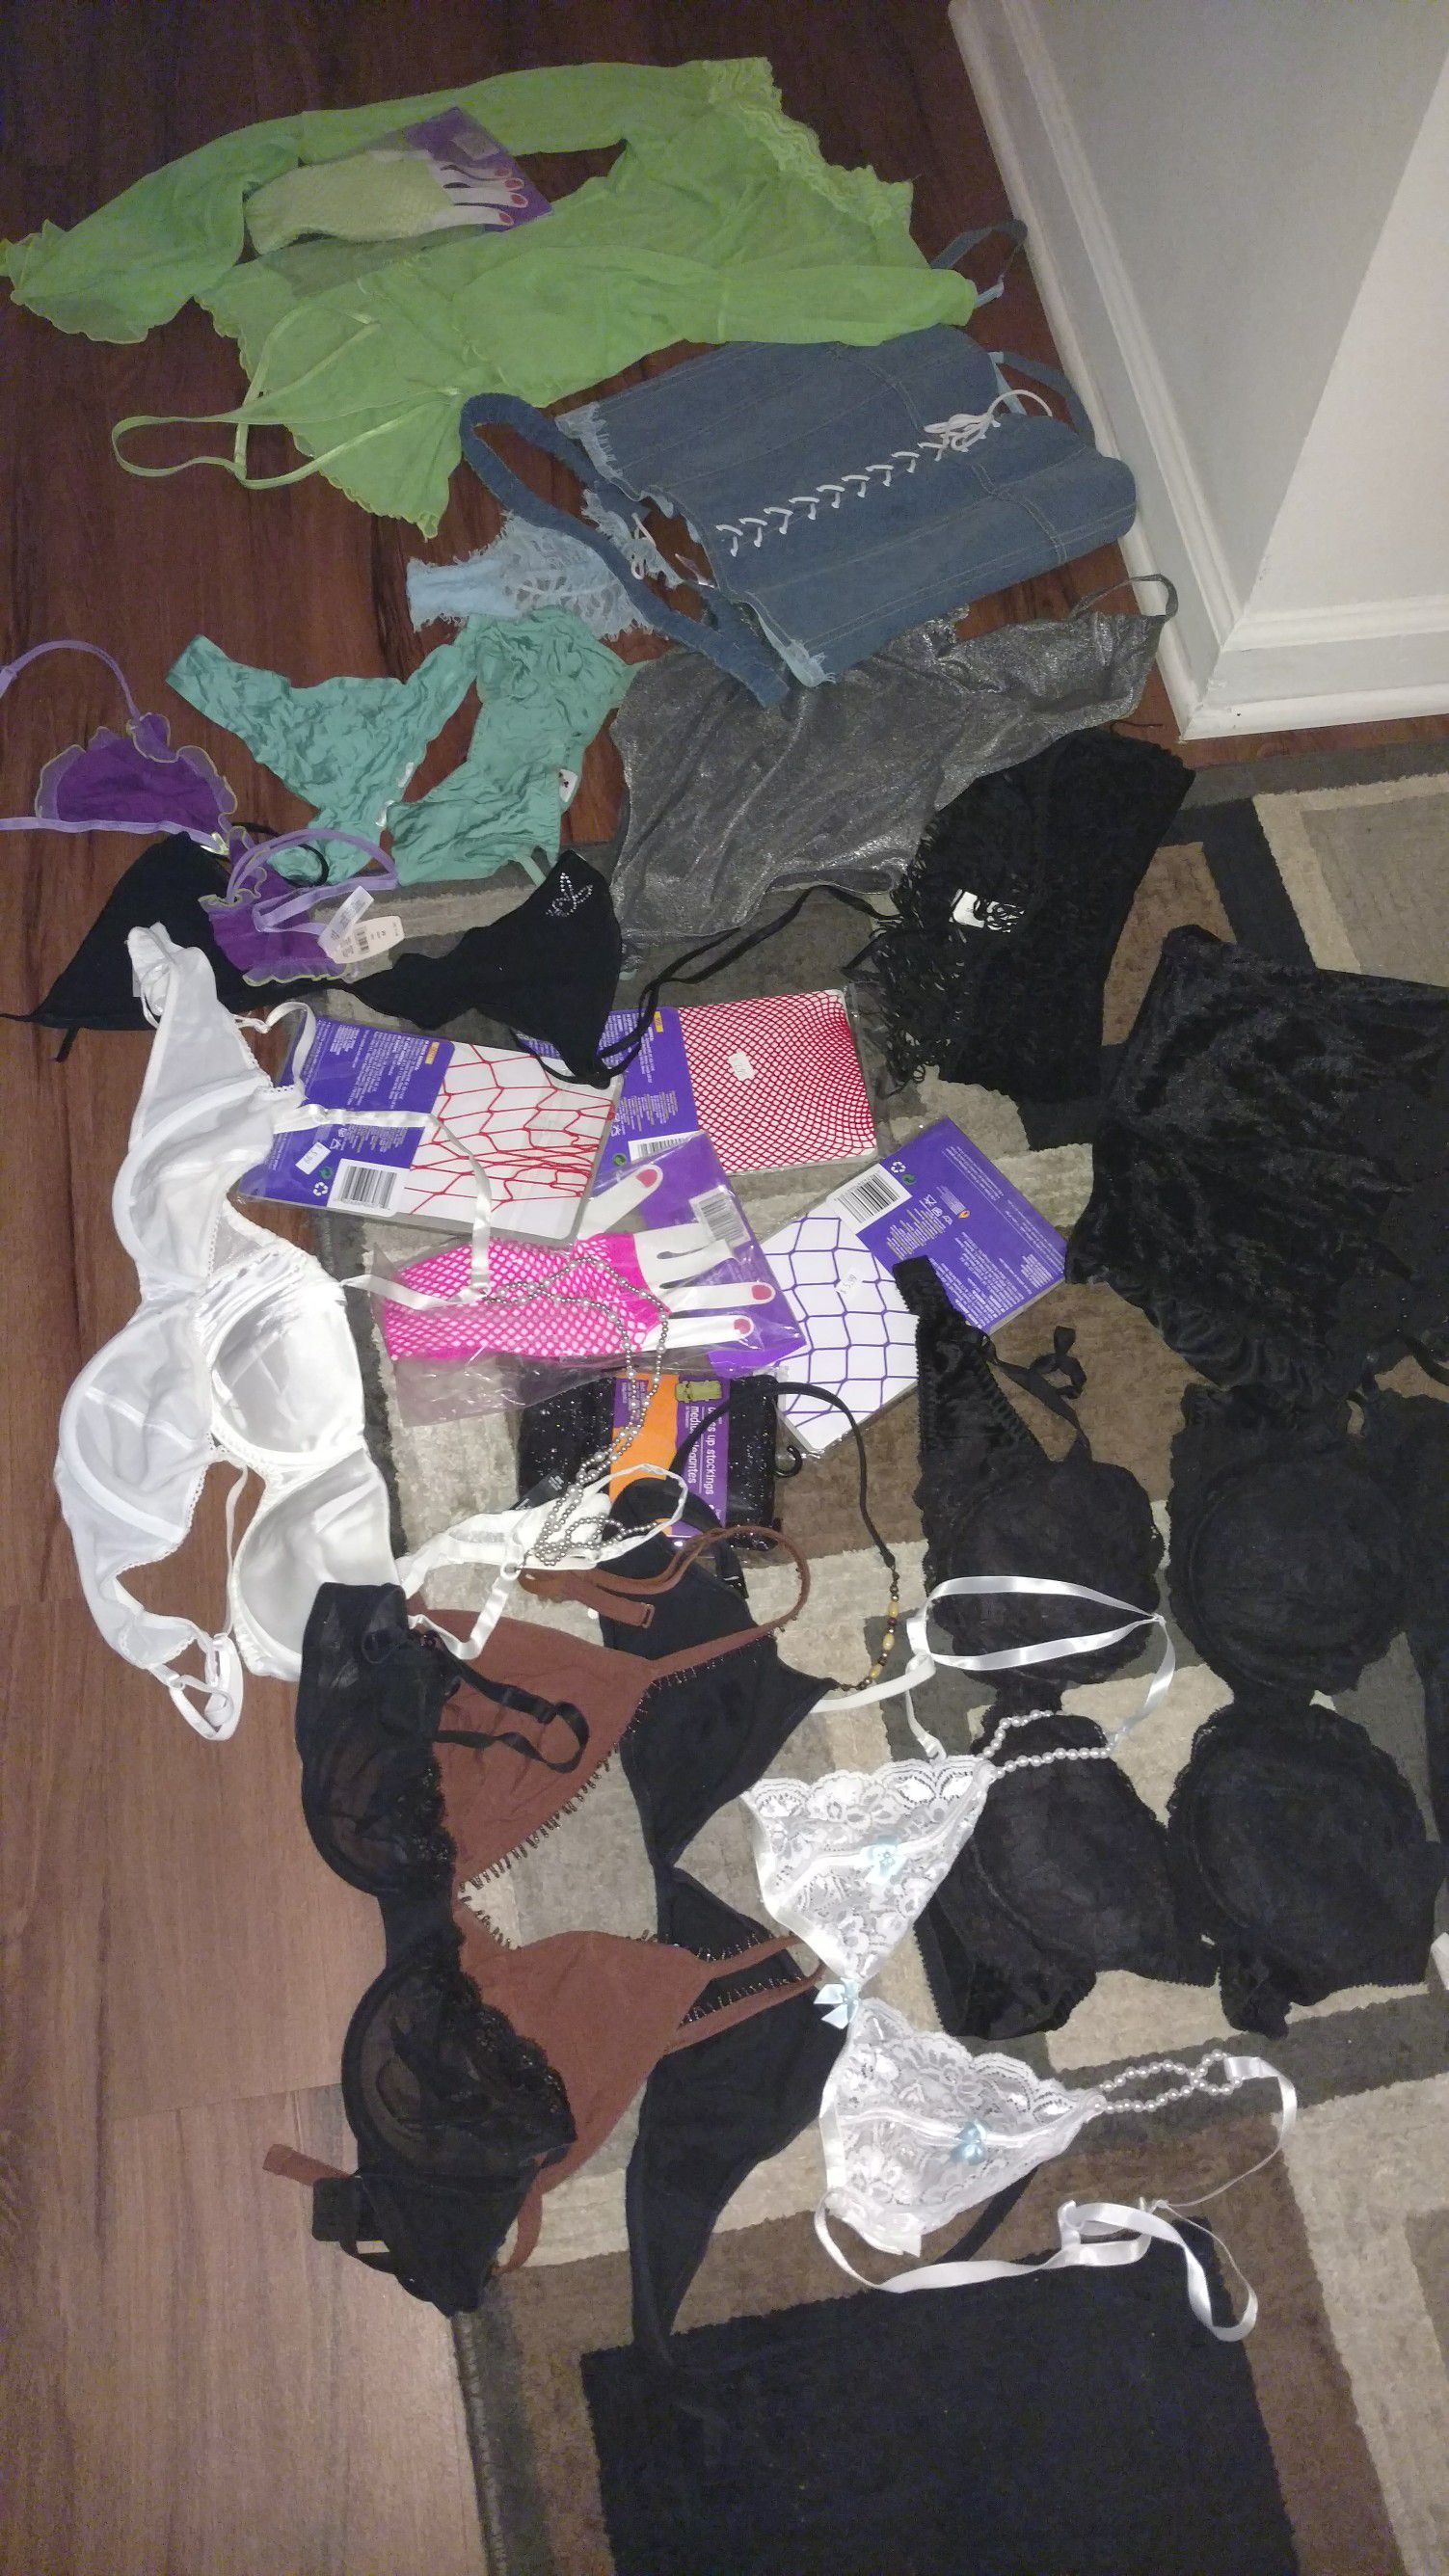 Victoria's Secrets, Frederick's of Hollywood, Brazilian line, and express